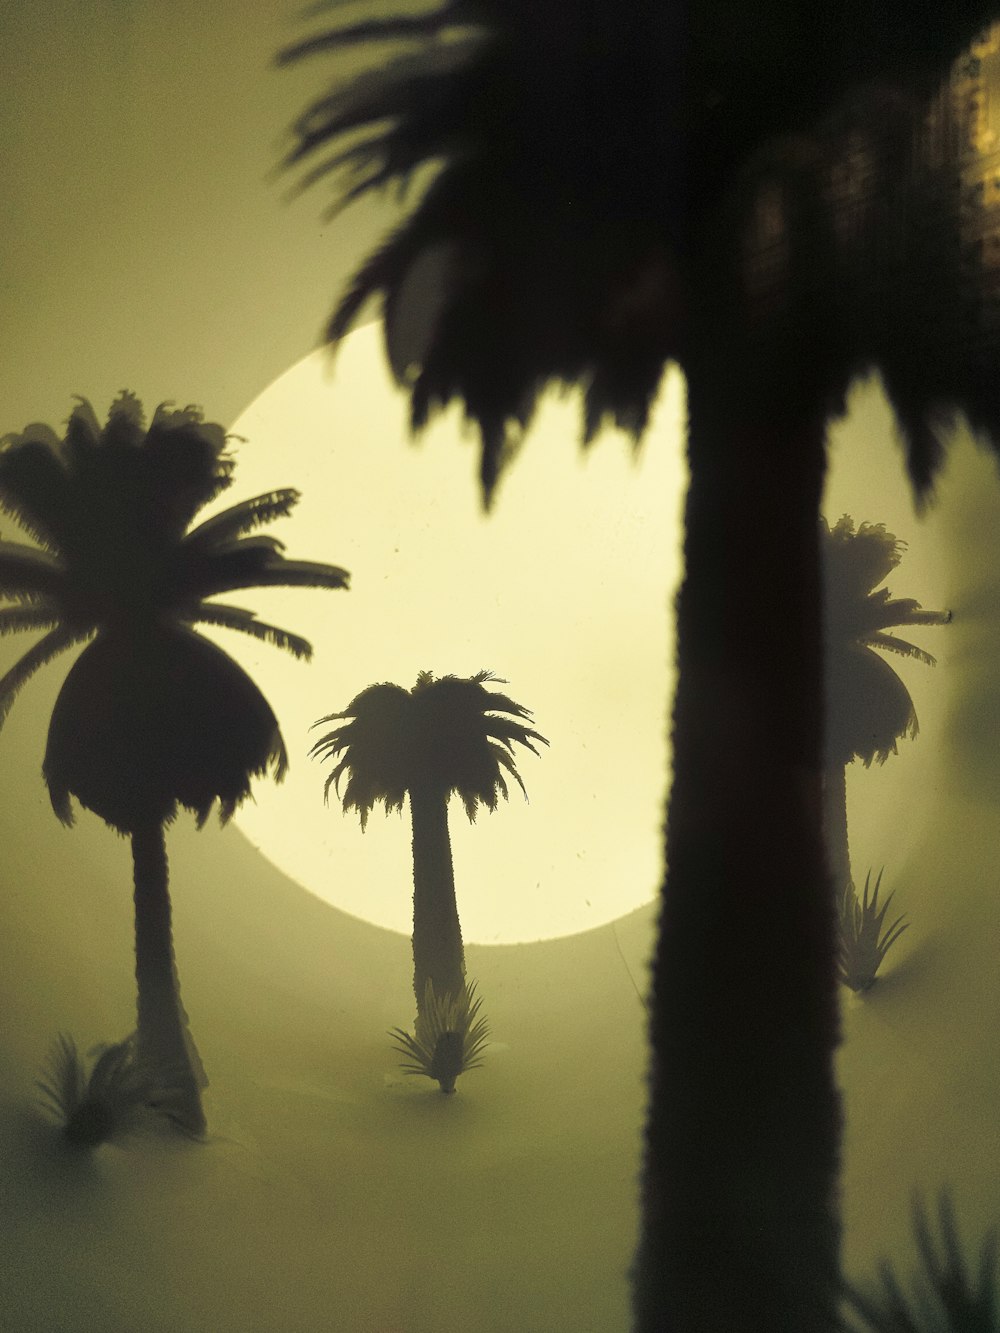 a couple of palm trees standing in the middle of a desert